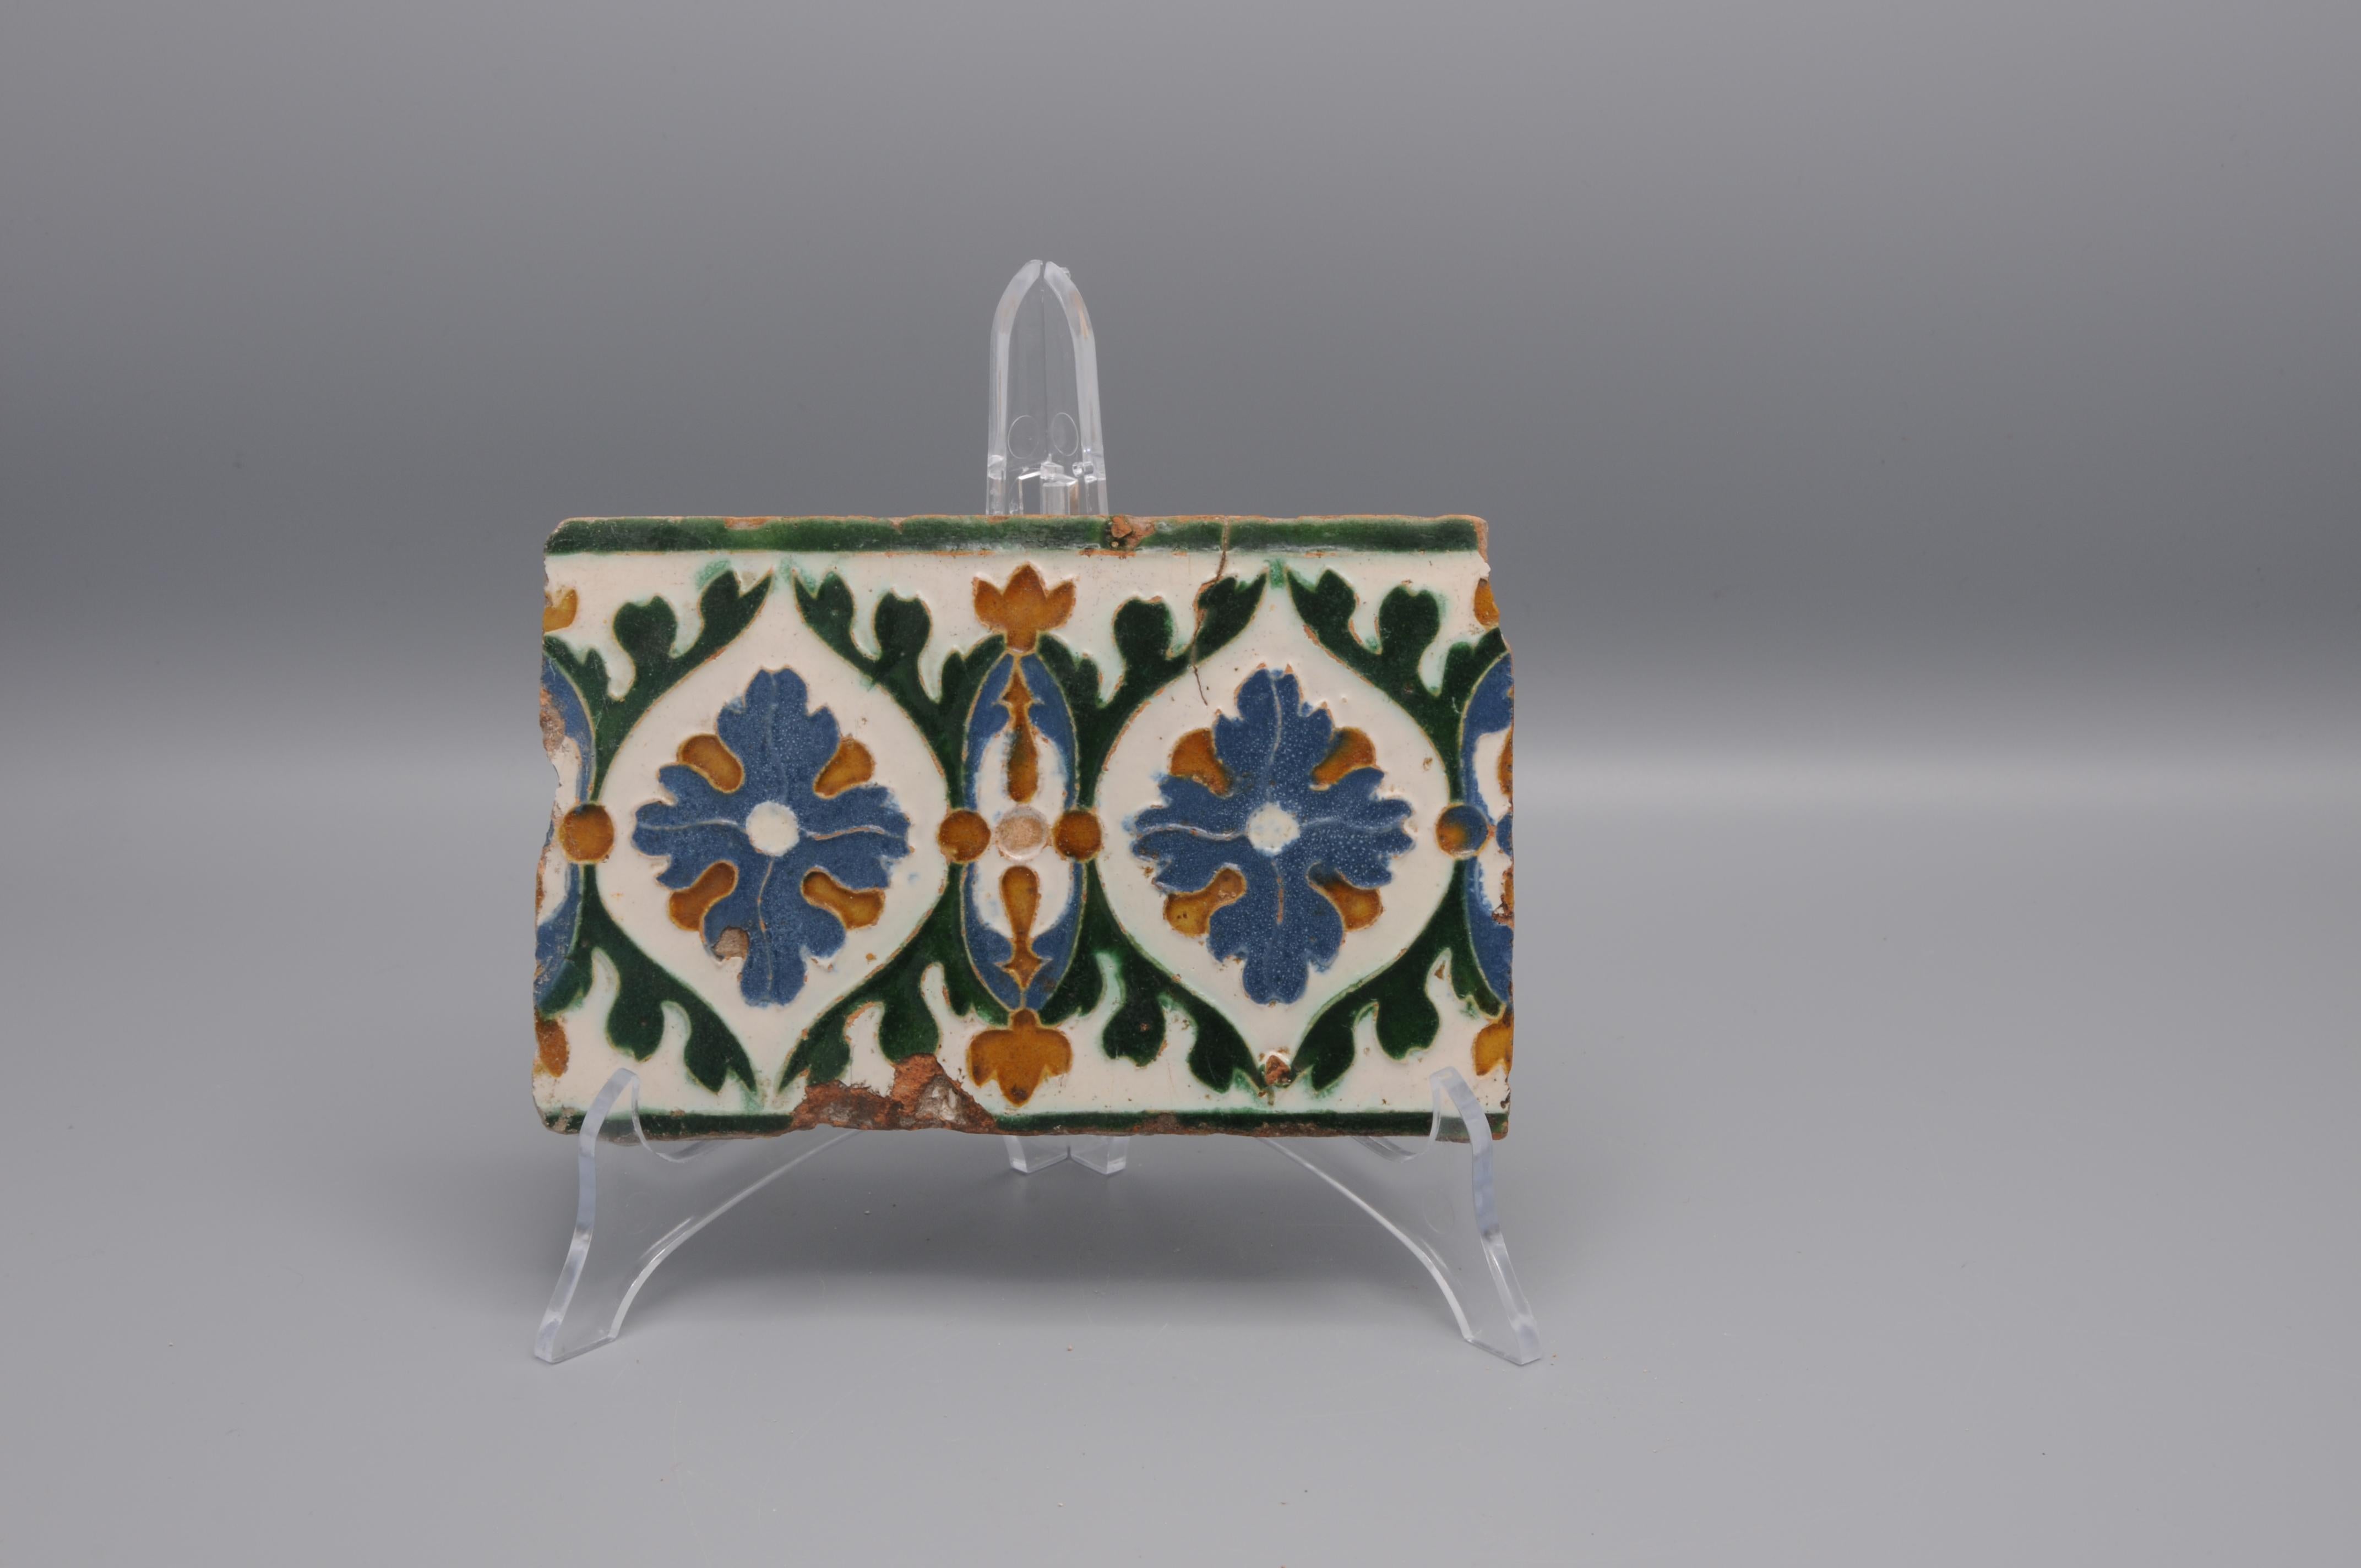 Early Arista /  border tile made in Toledo. Tile decorated in renaissance with stylized flowers was probably made between 1550 and 1575. 

Catalogue: La Azulejería Toledana a Través de los Siglos. Toledo 1979.

